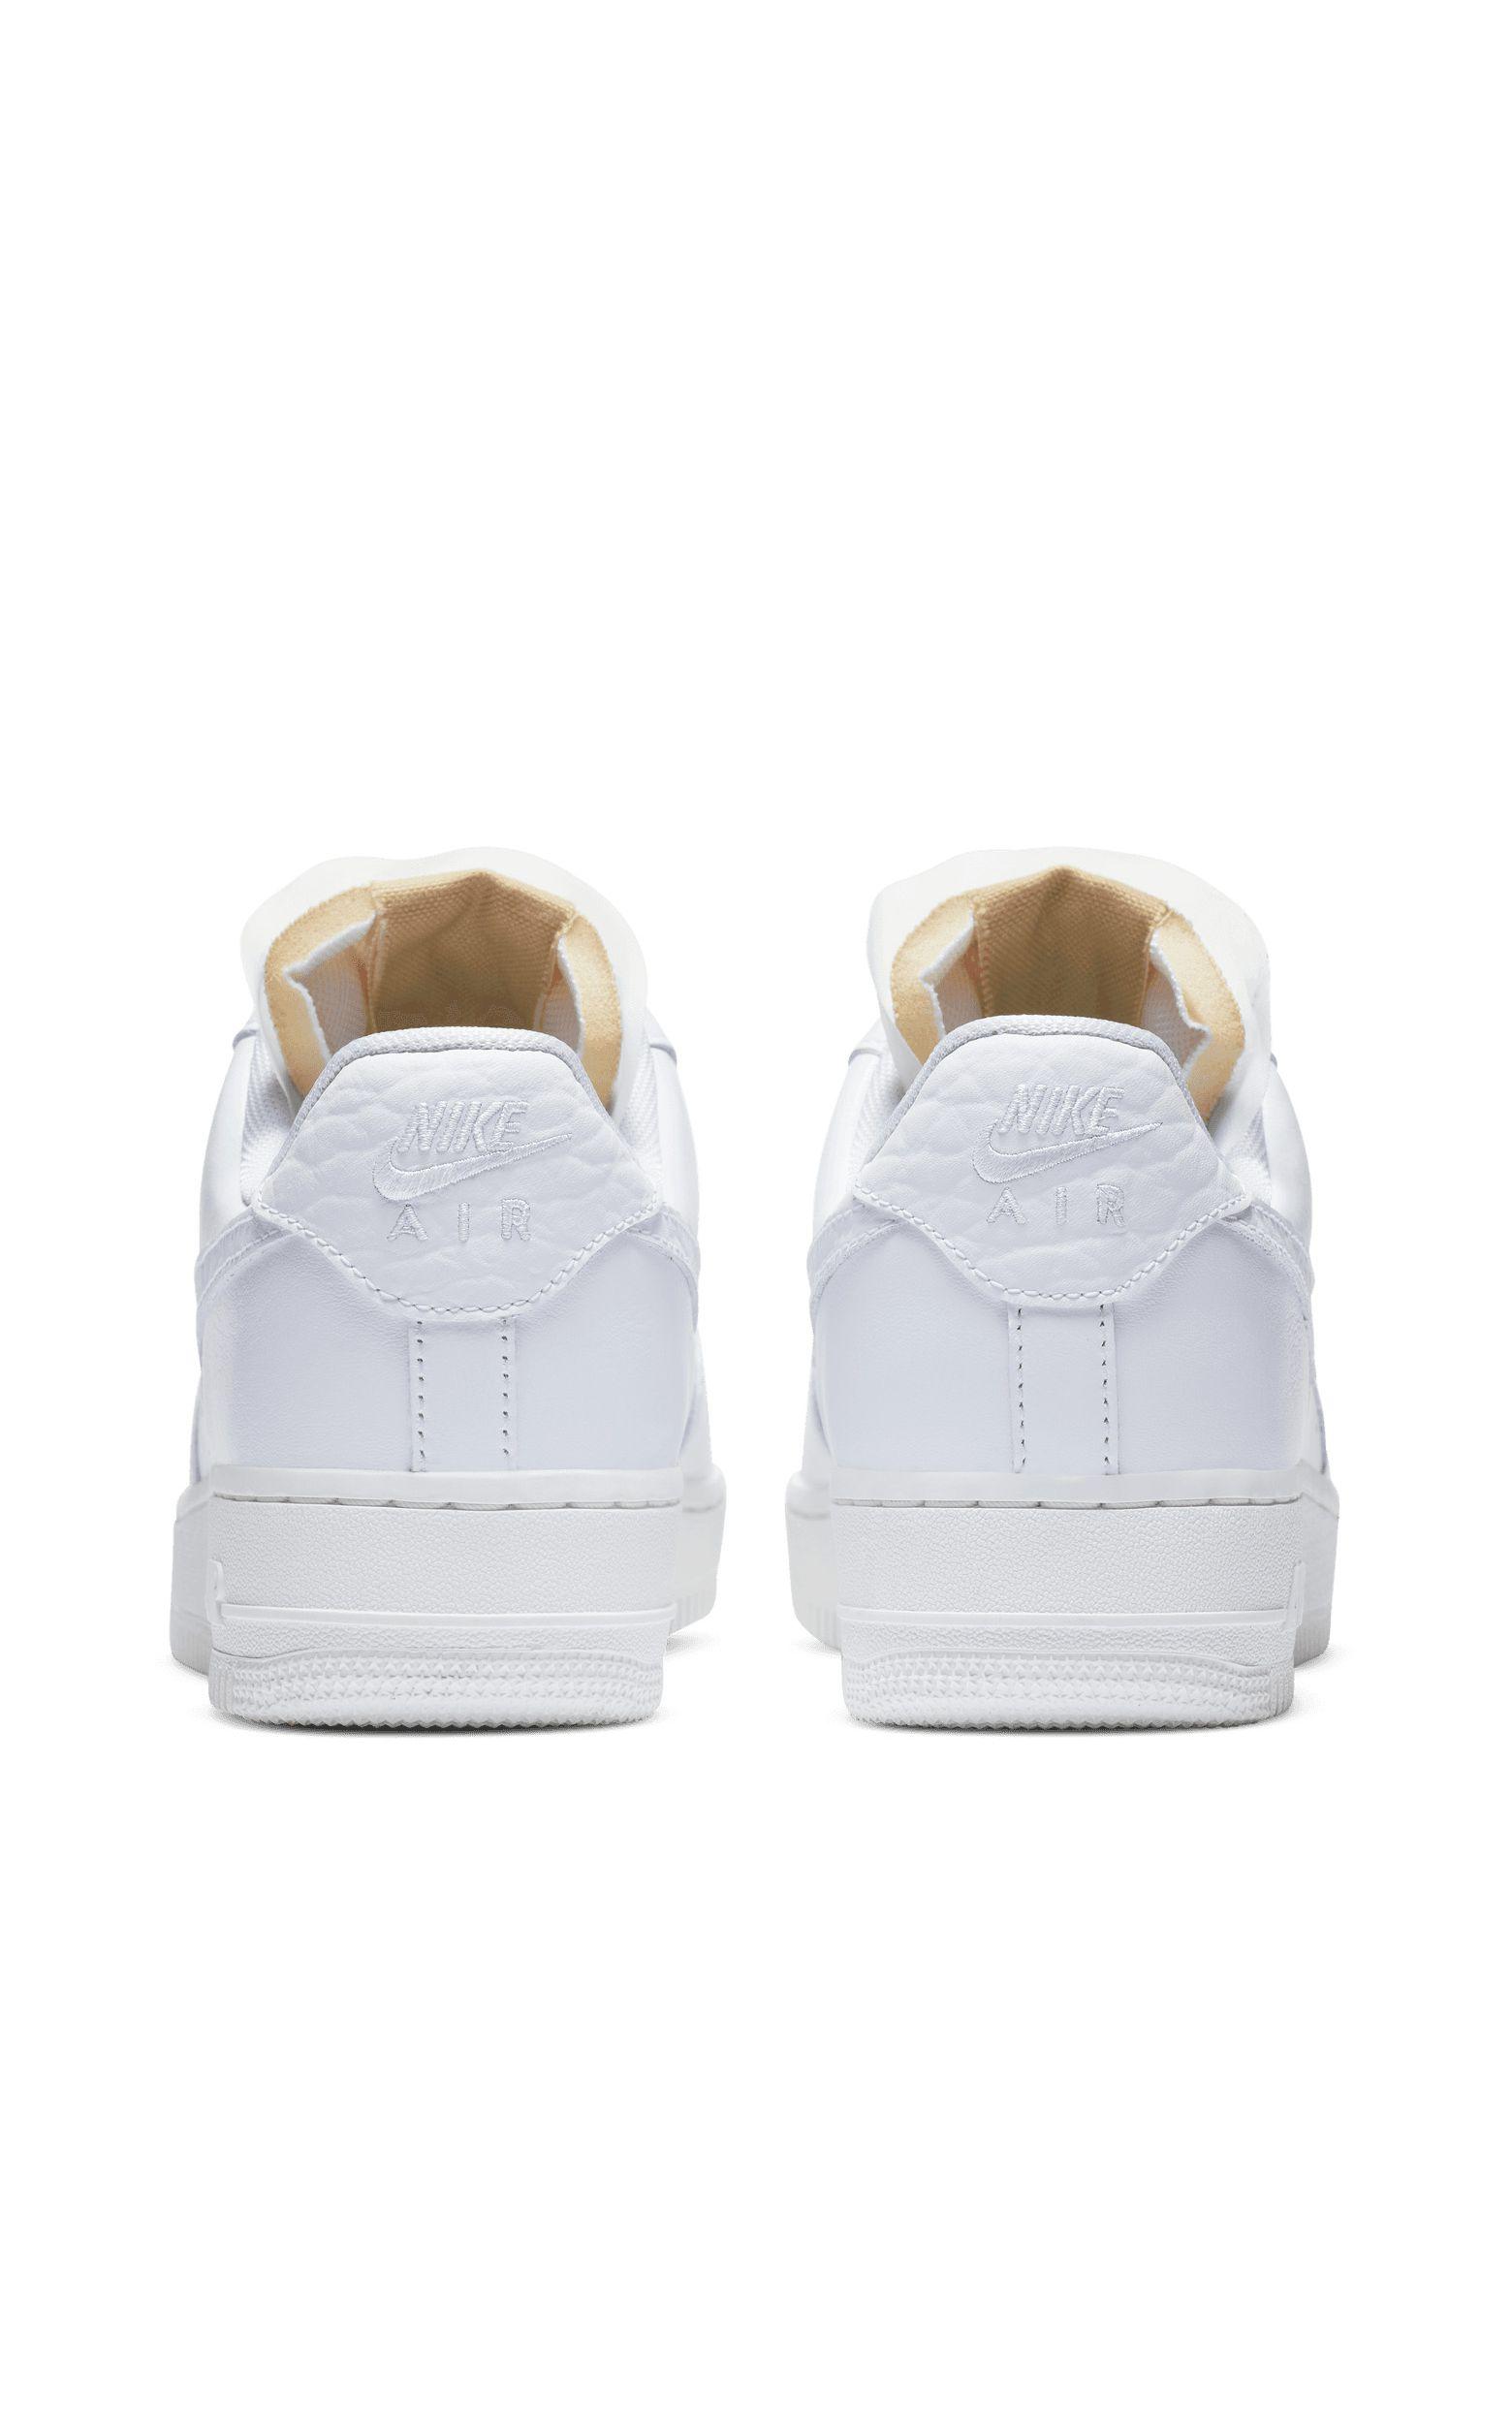 Nike Air Force 1 '07 40th anniversary sneakers in off-white and